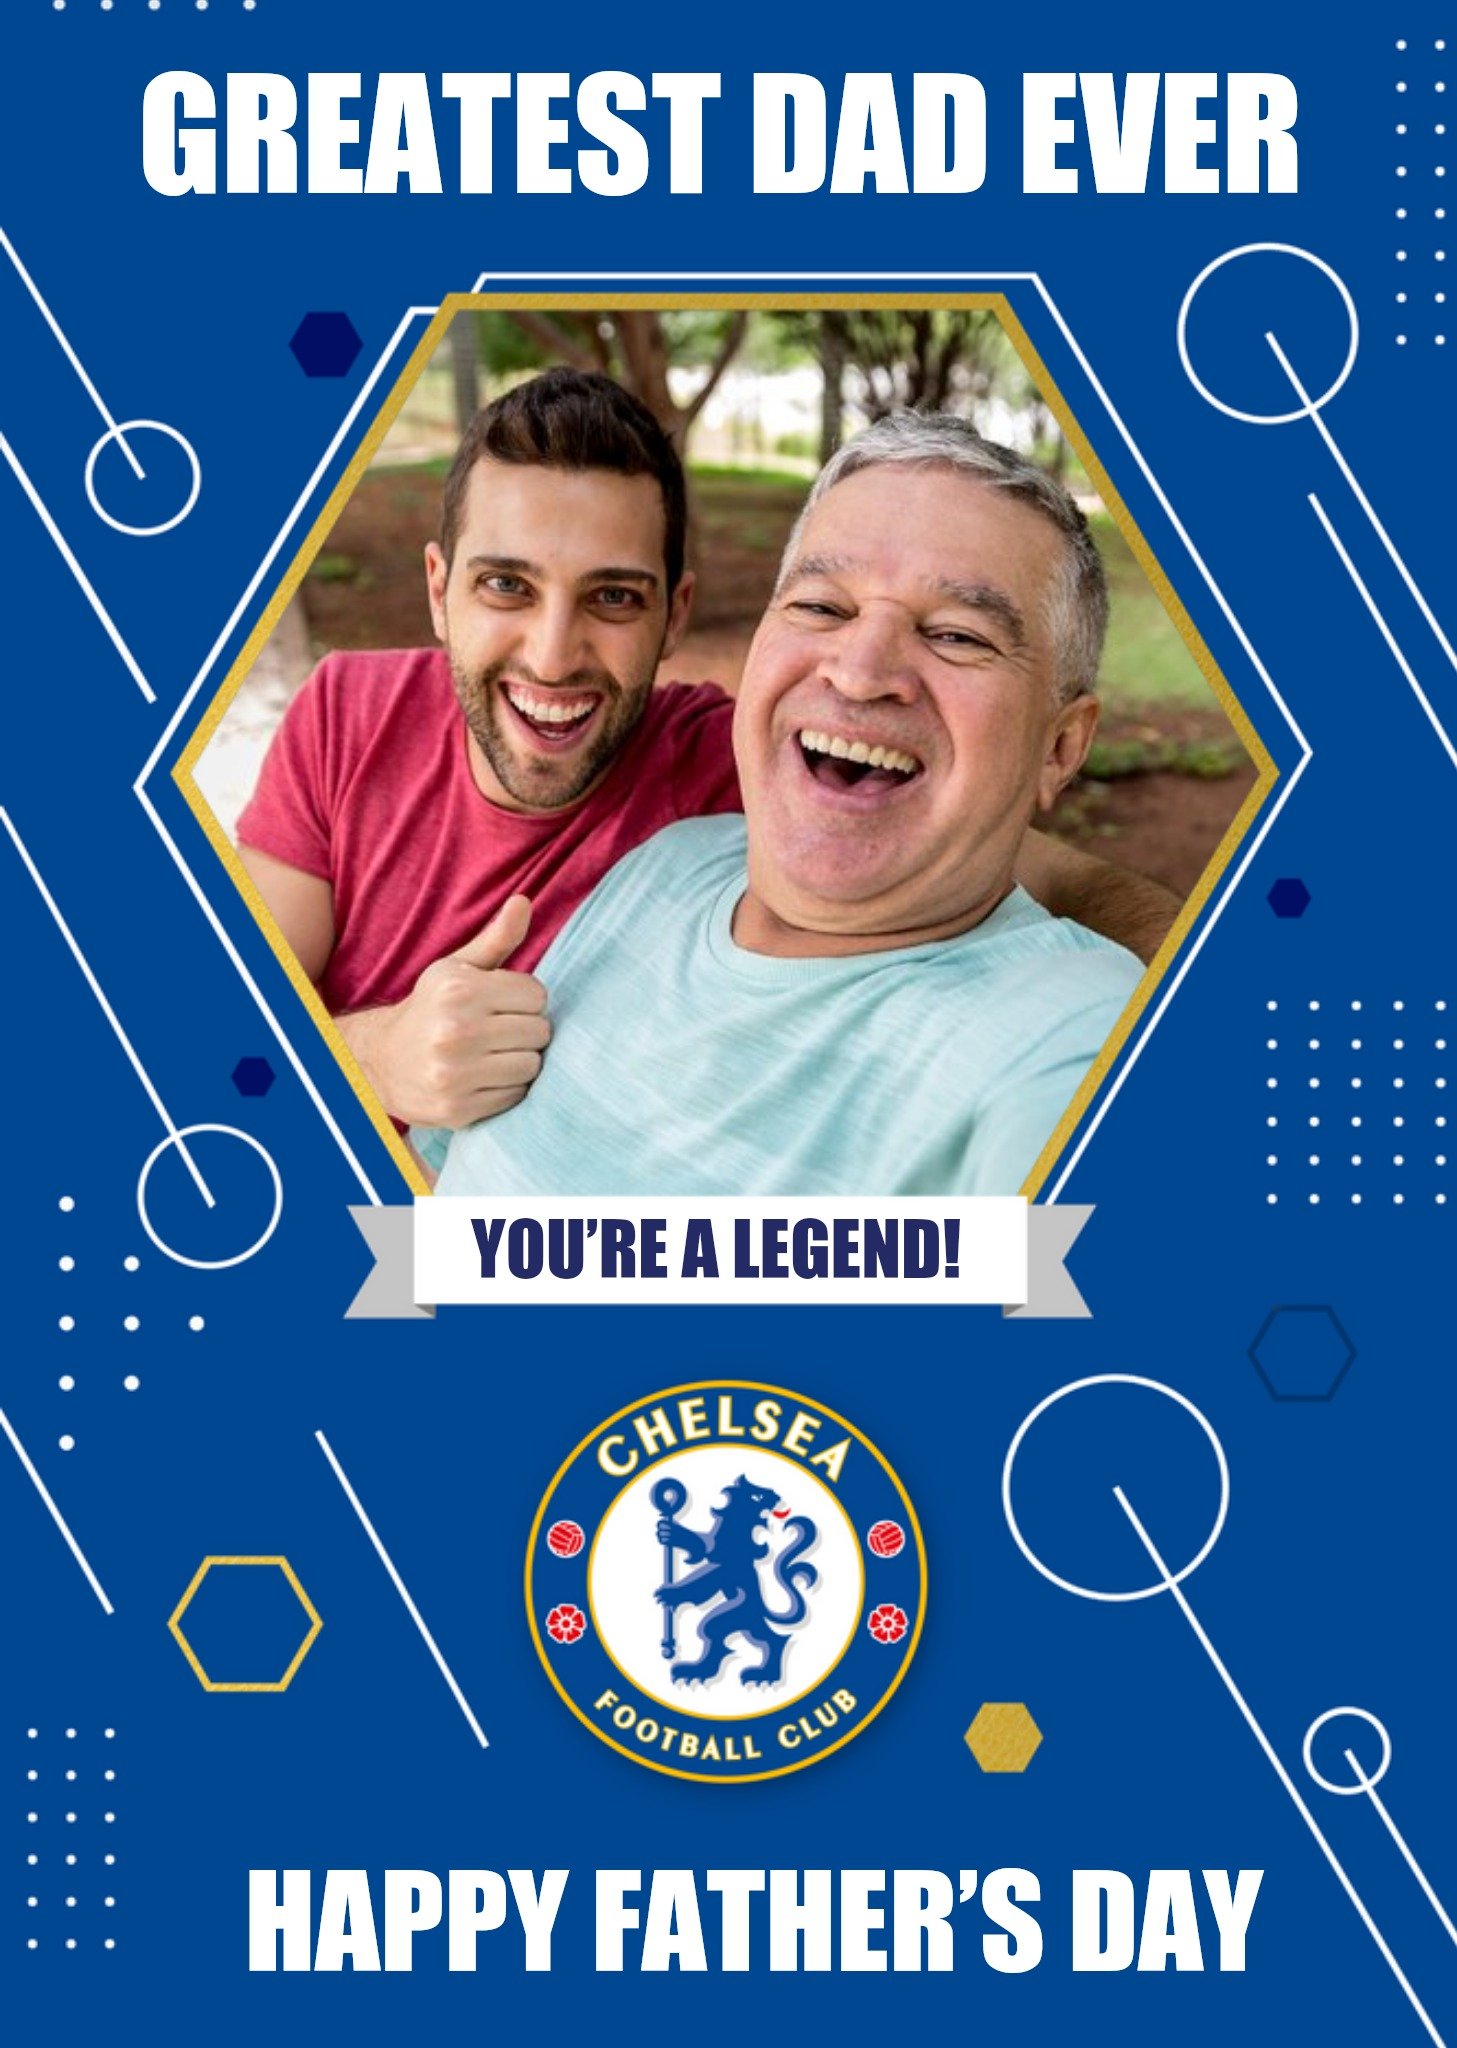 Chelsea Fc Football Legend Greatest Dad Ever Photo Upload Fathers Day Card Ecard